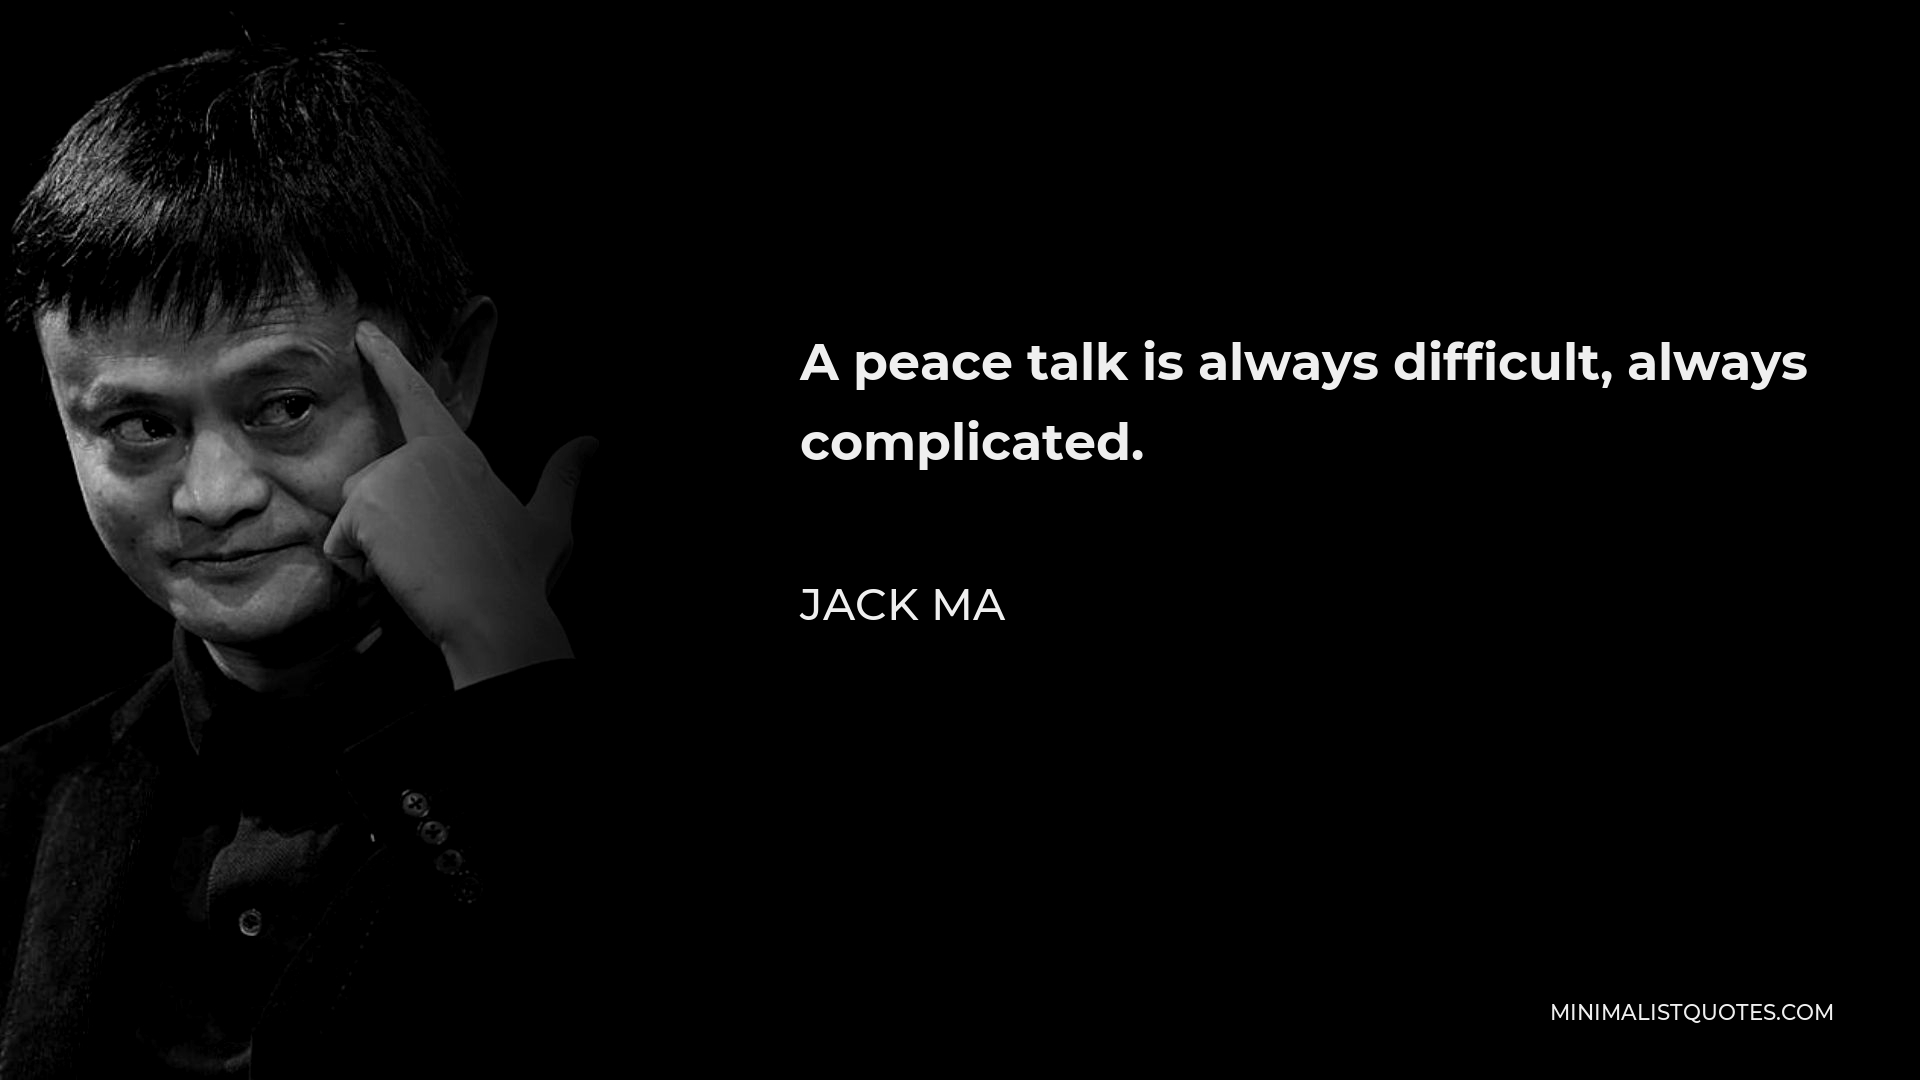 Jack Ma Quote - A peace talk is always difficult, always complicated.